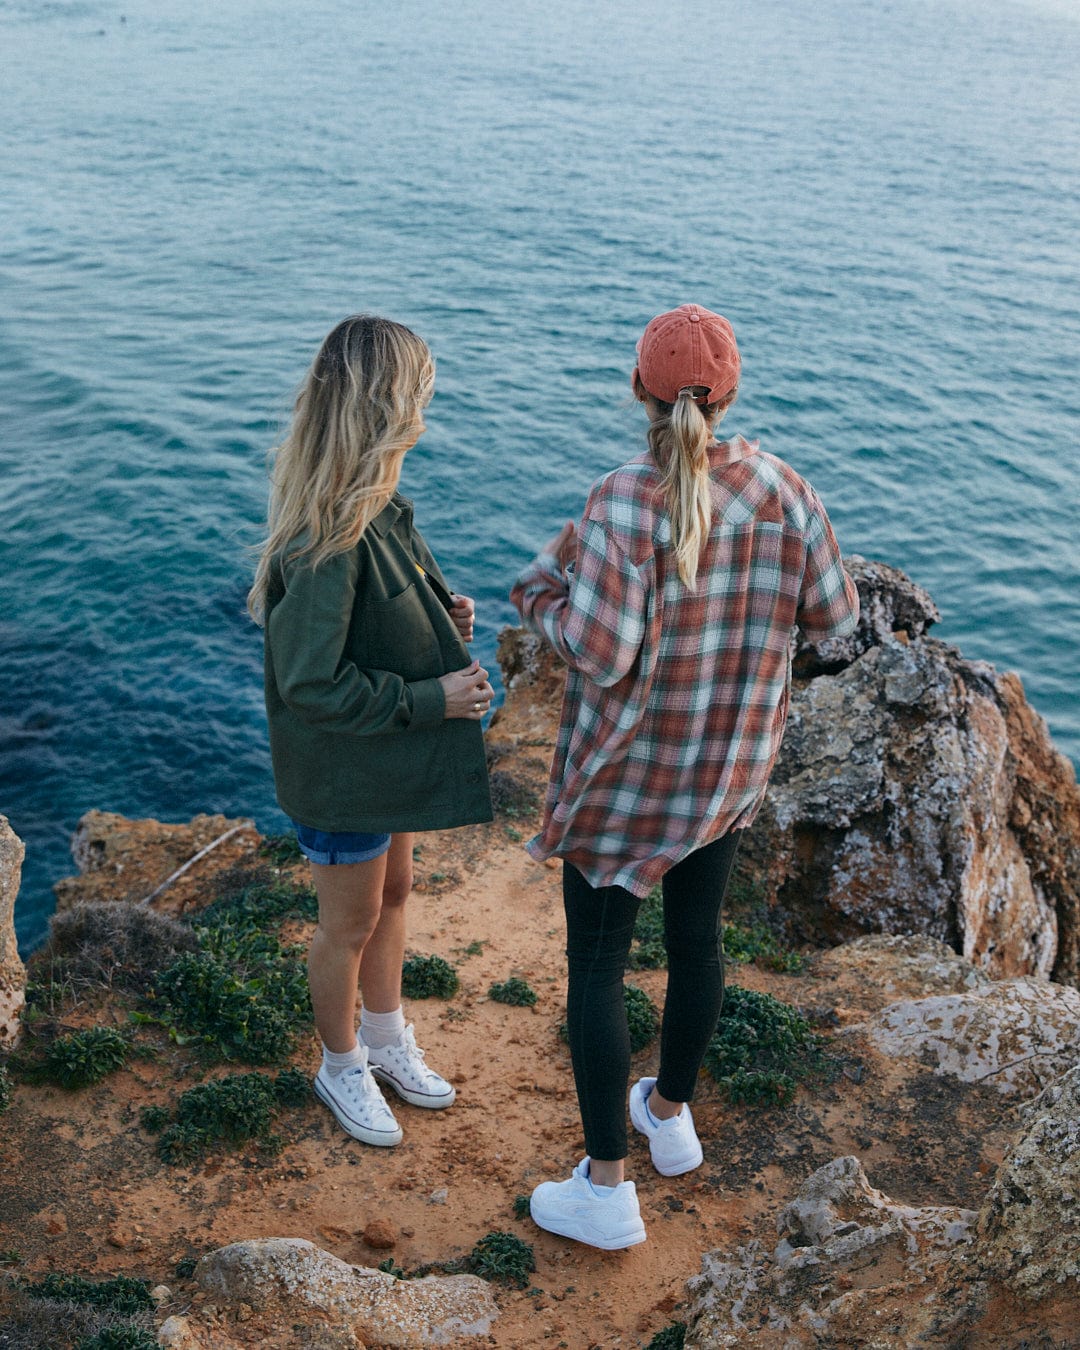 Two individuals wearing Rosalin - Womens Long Sleeve Shirts in Orange/green by Saltrock, with contrasting buttons, are standing on a rocky cliff overlooking the sea.